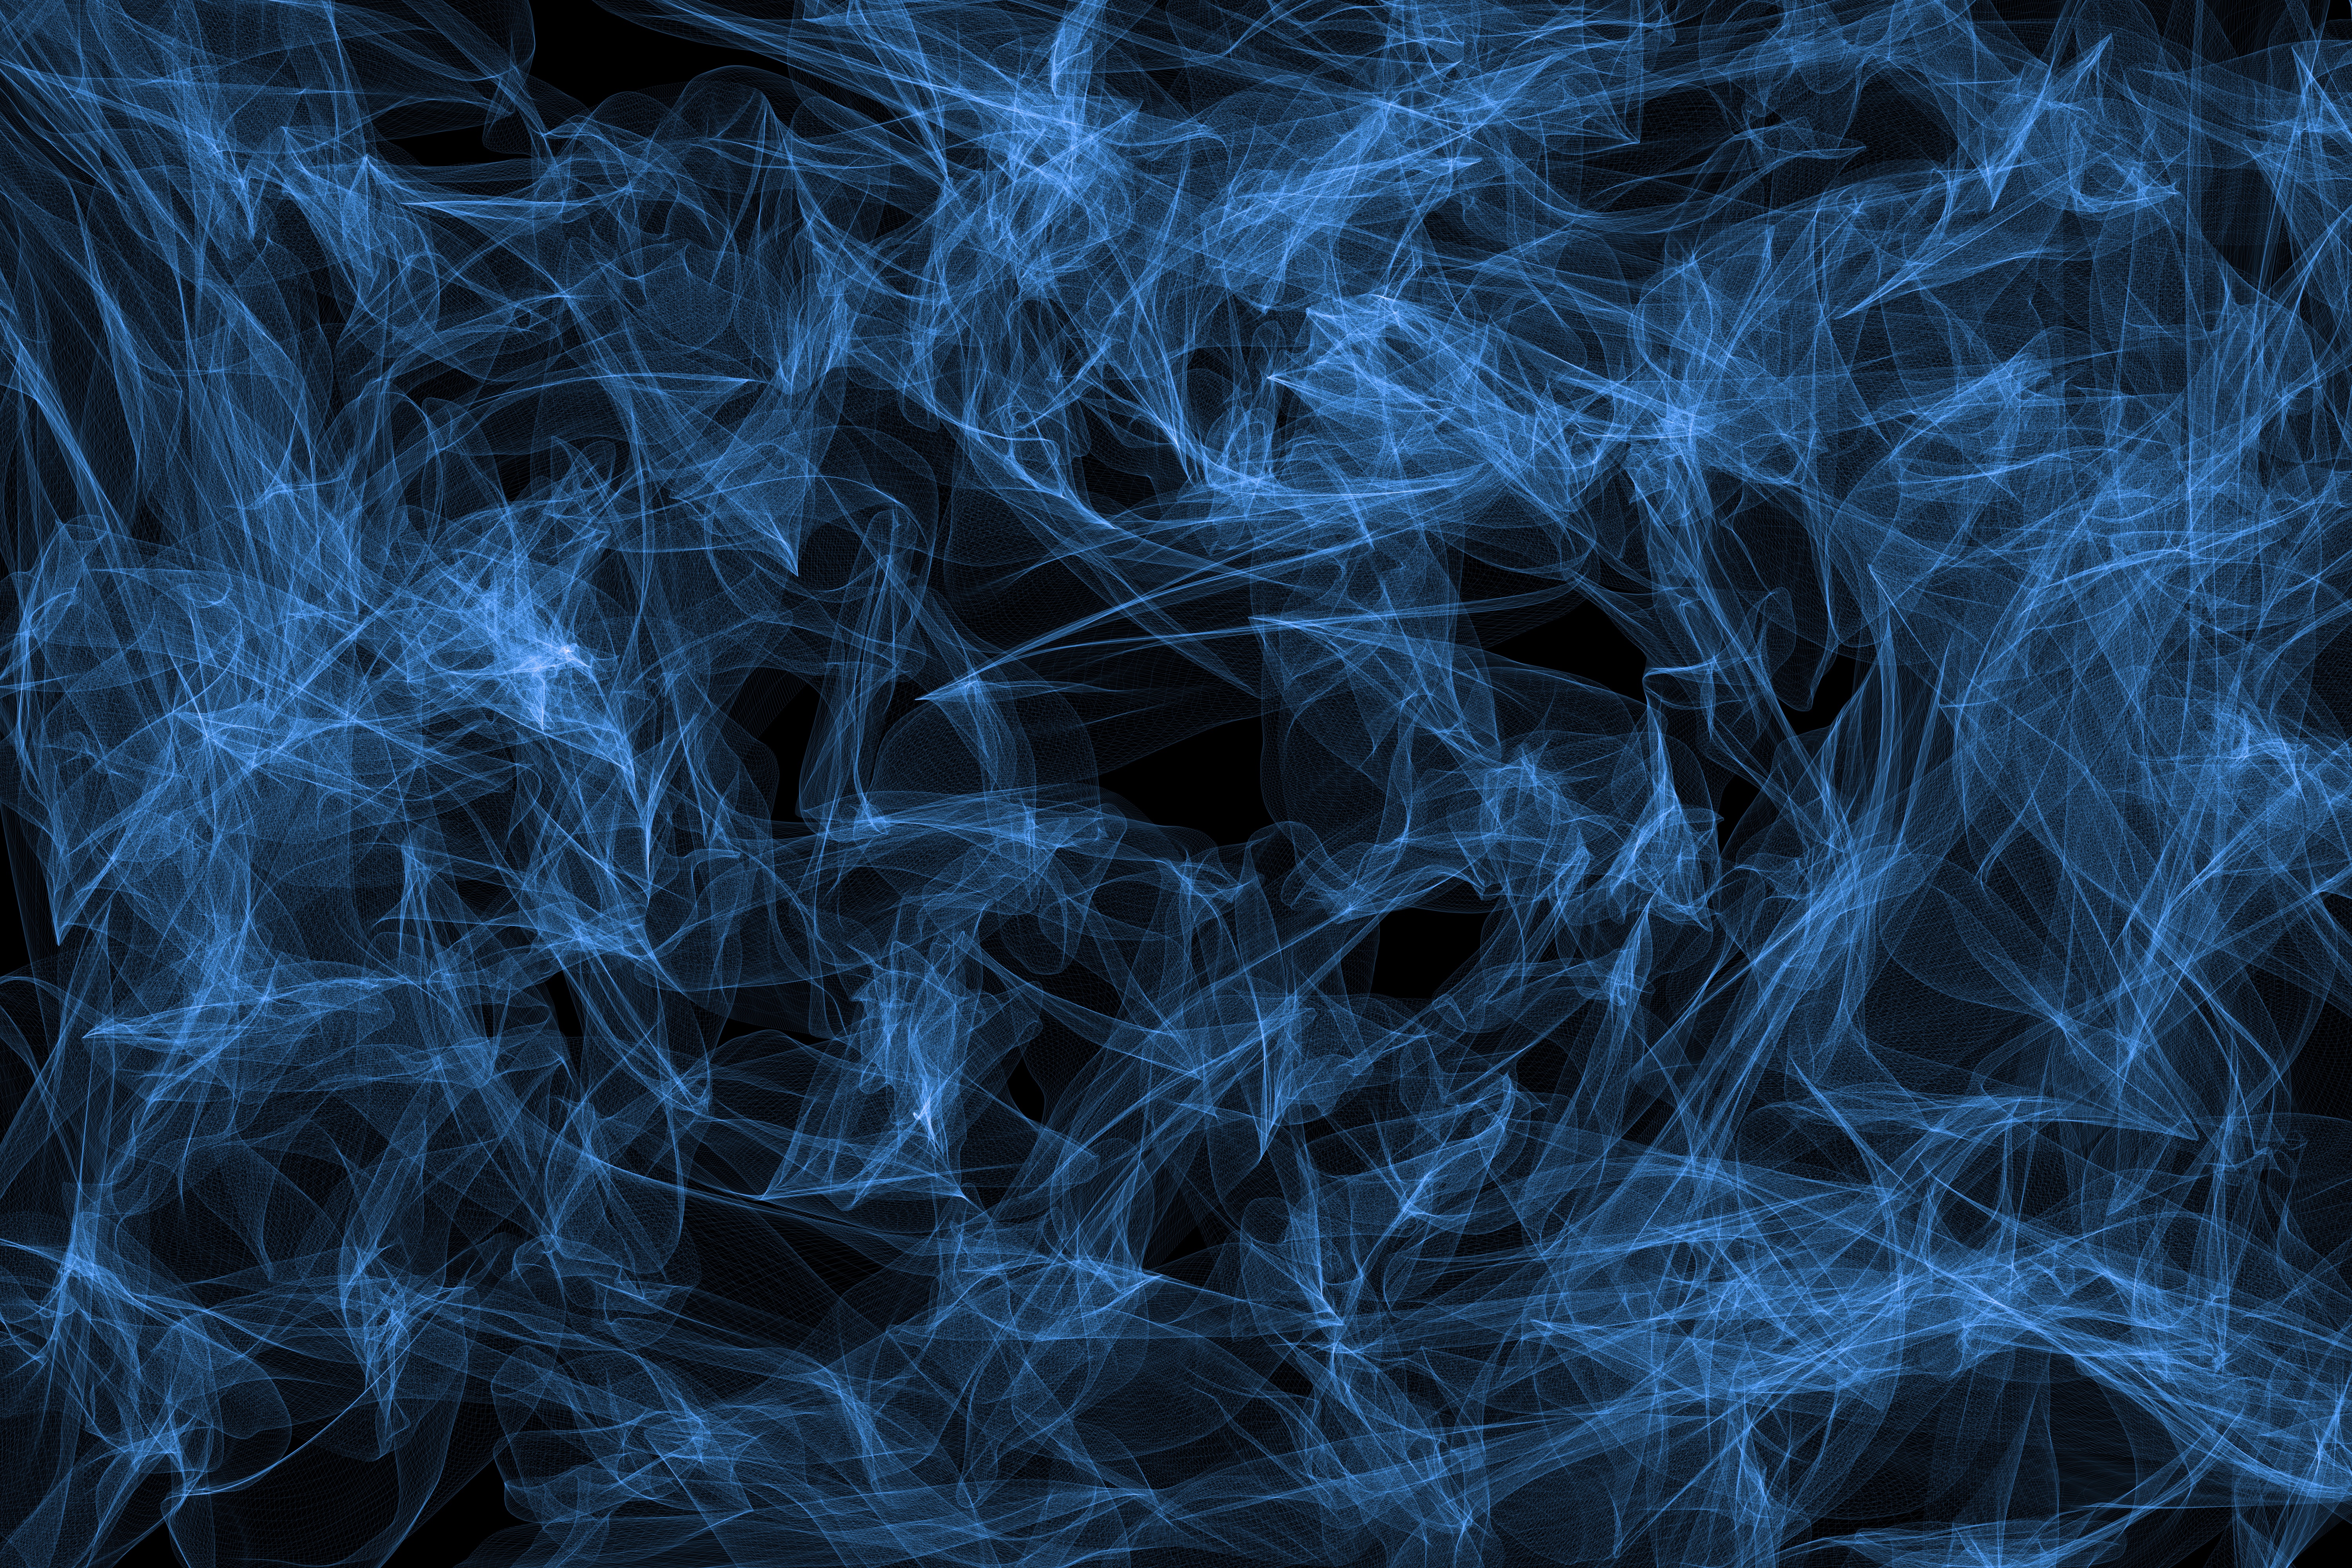 68451 download wallpaper abstract, smoke, structure, particles screensavers and pictures for free